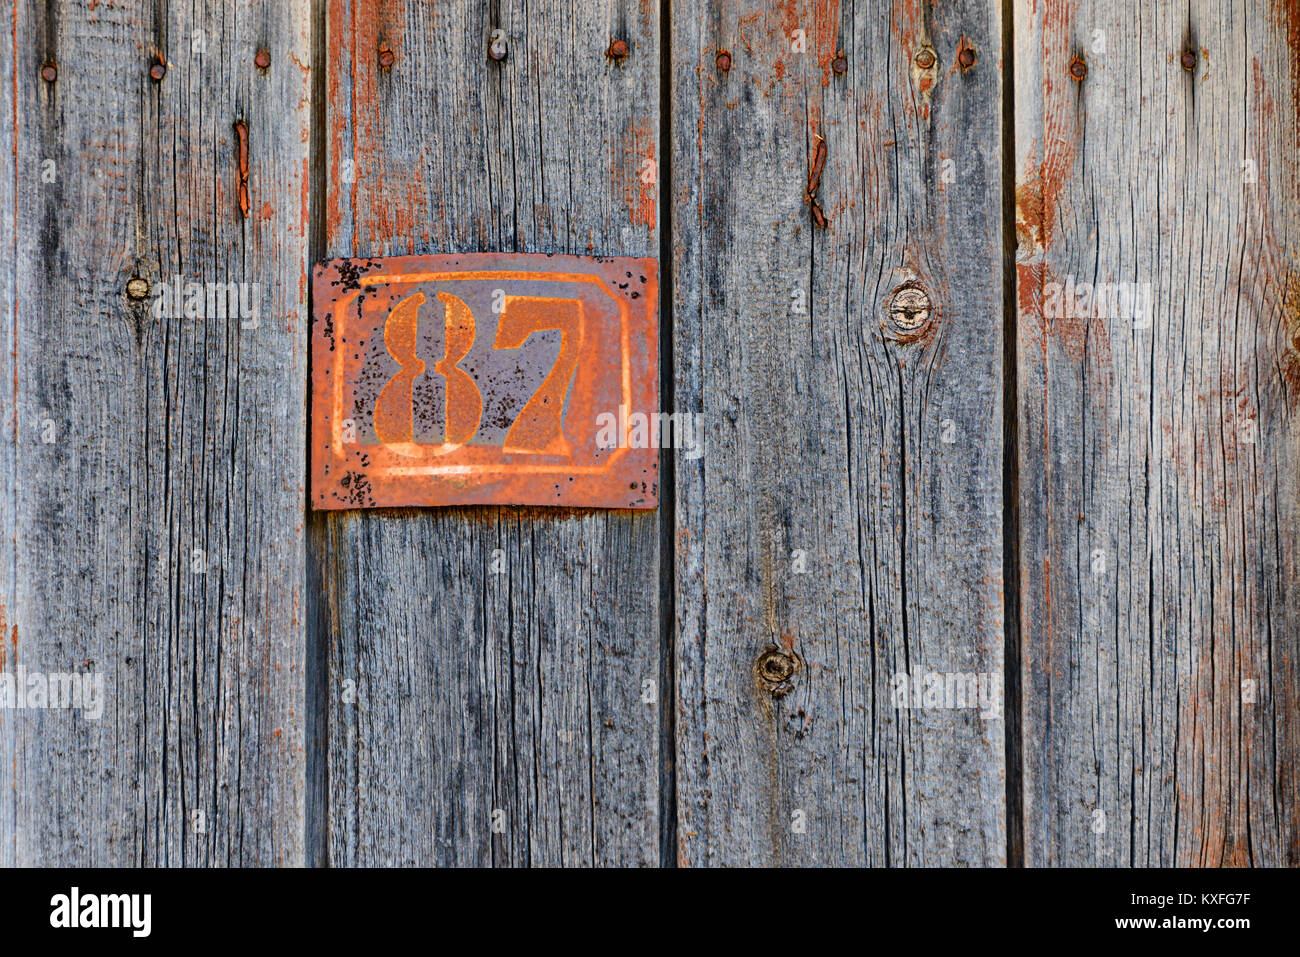 Rusty grunge metal house number plaque No. 87 on an old wooden door, vintage signs in Greece. Stock Photo